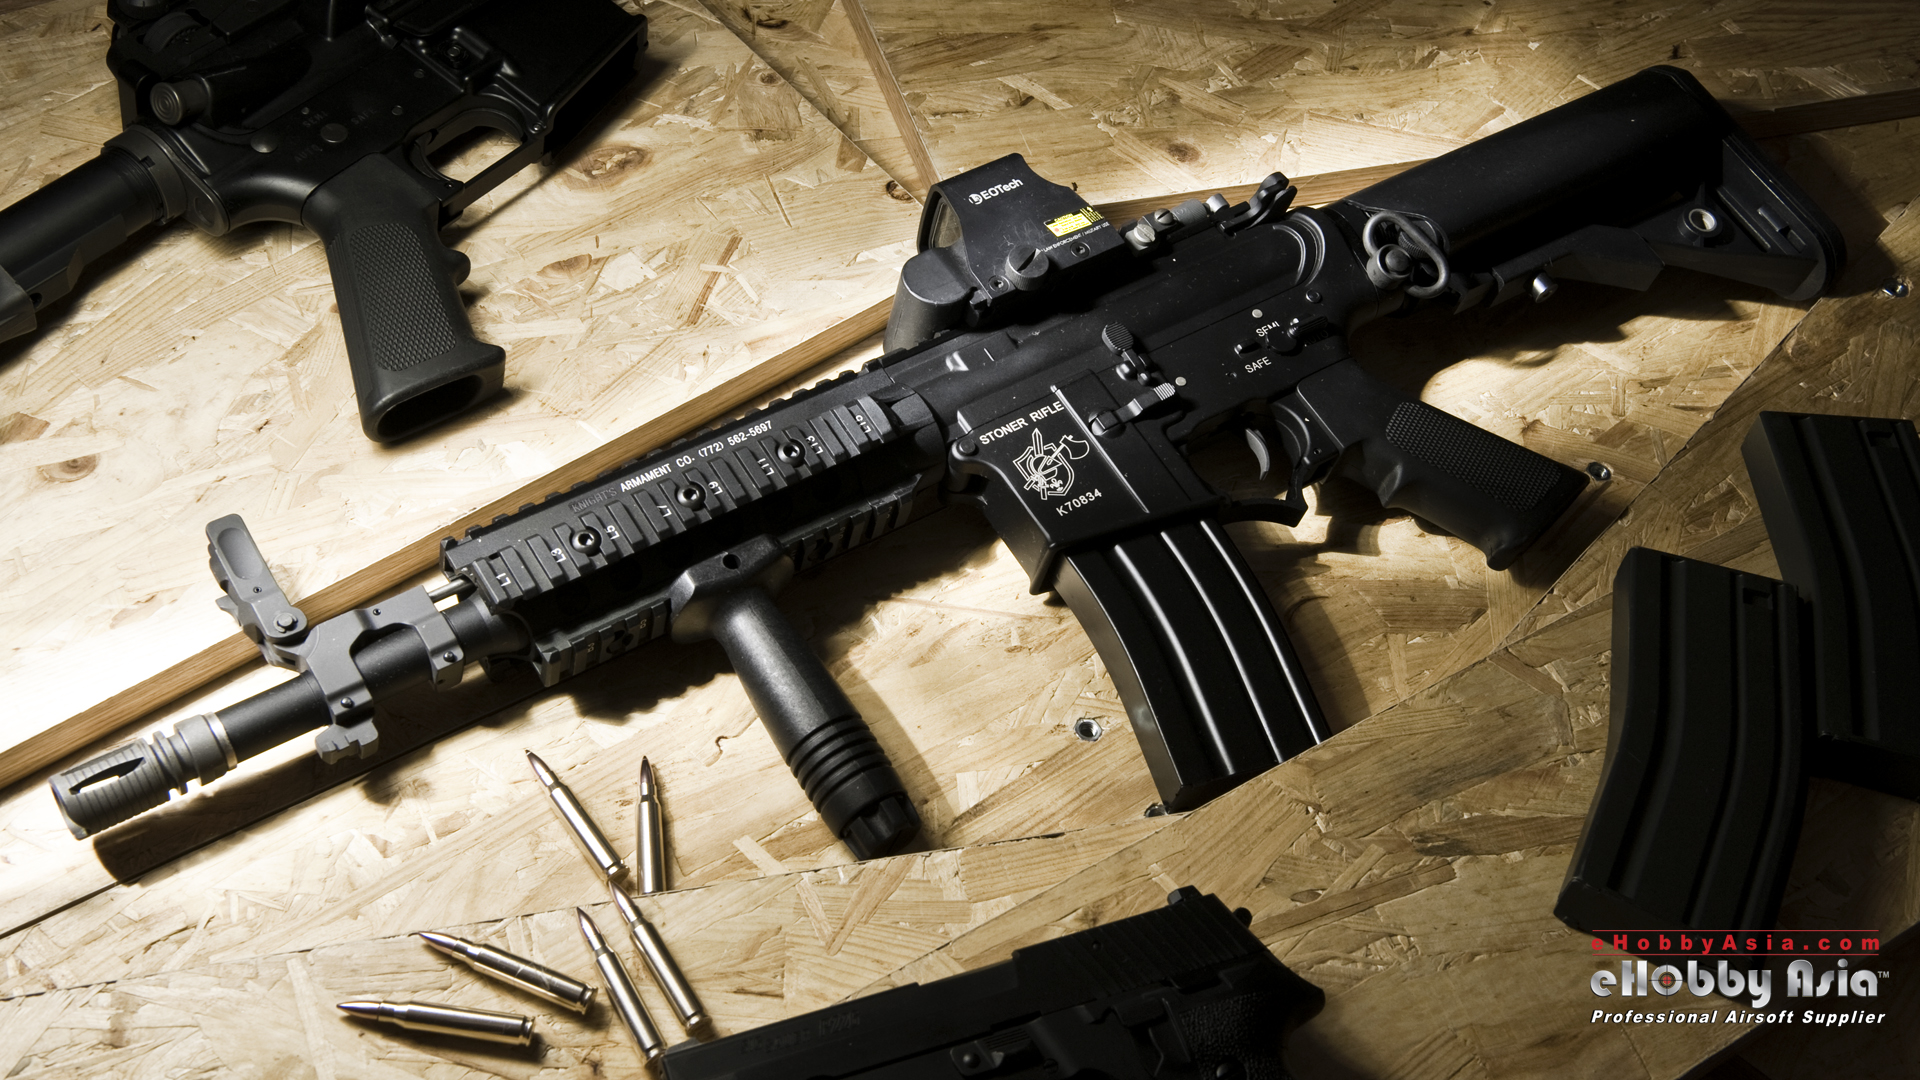 Gallery For Gt M4 Carbine Wallpaper